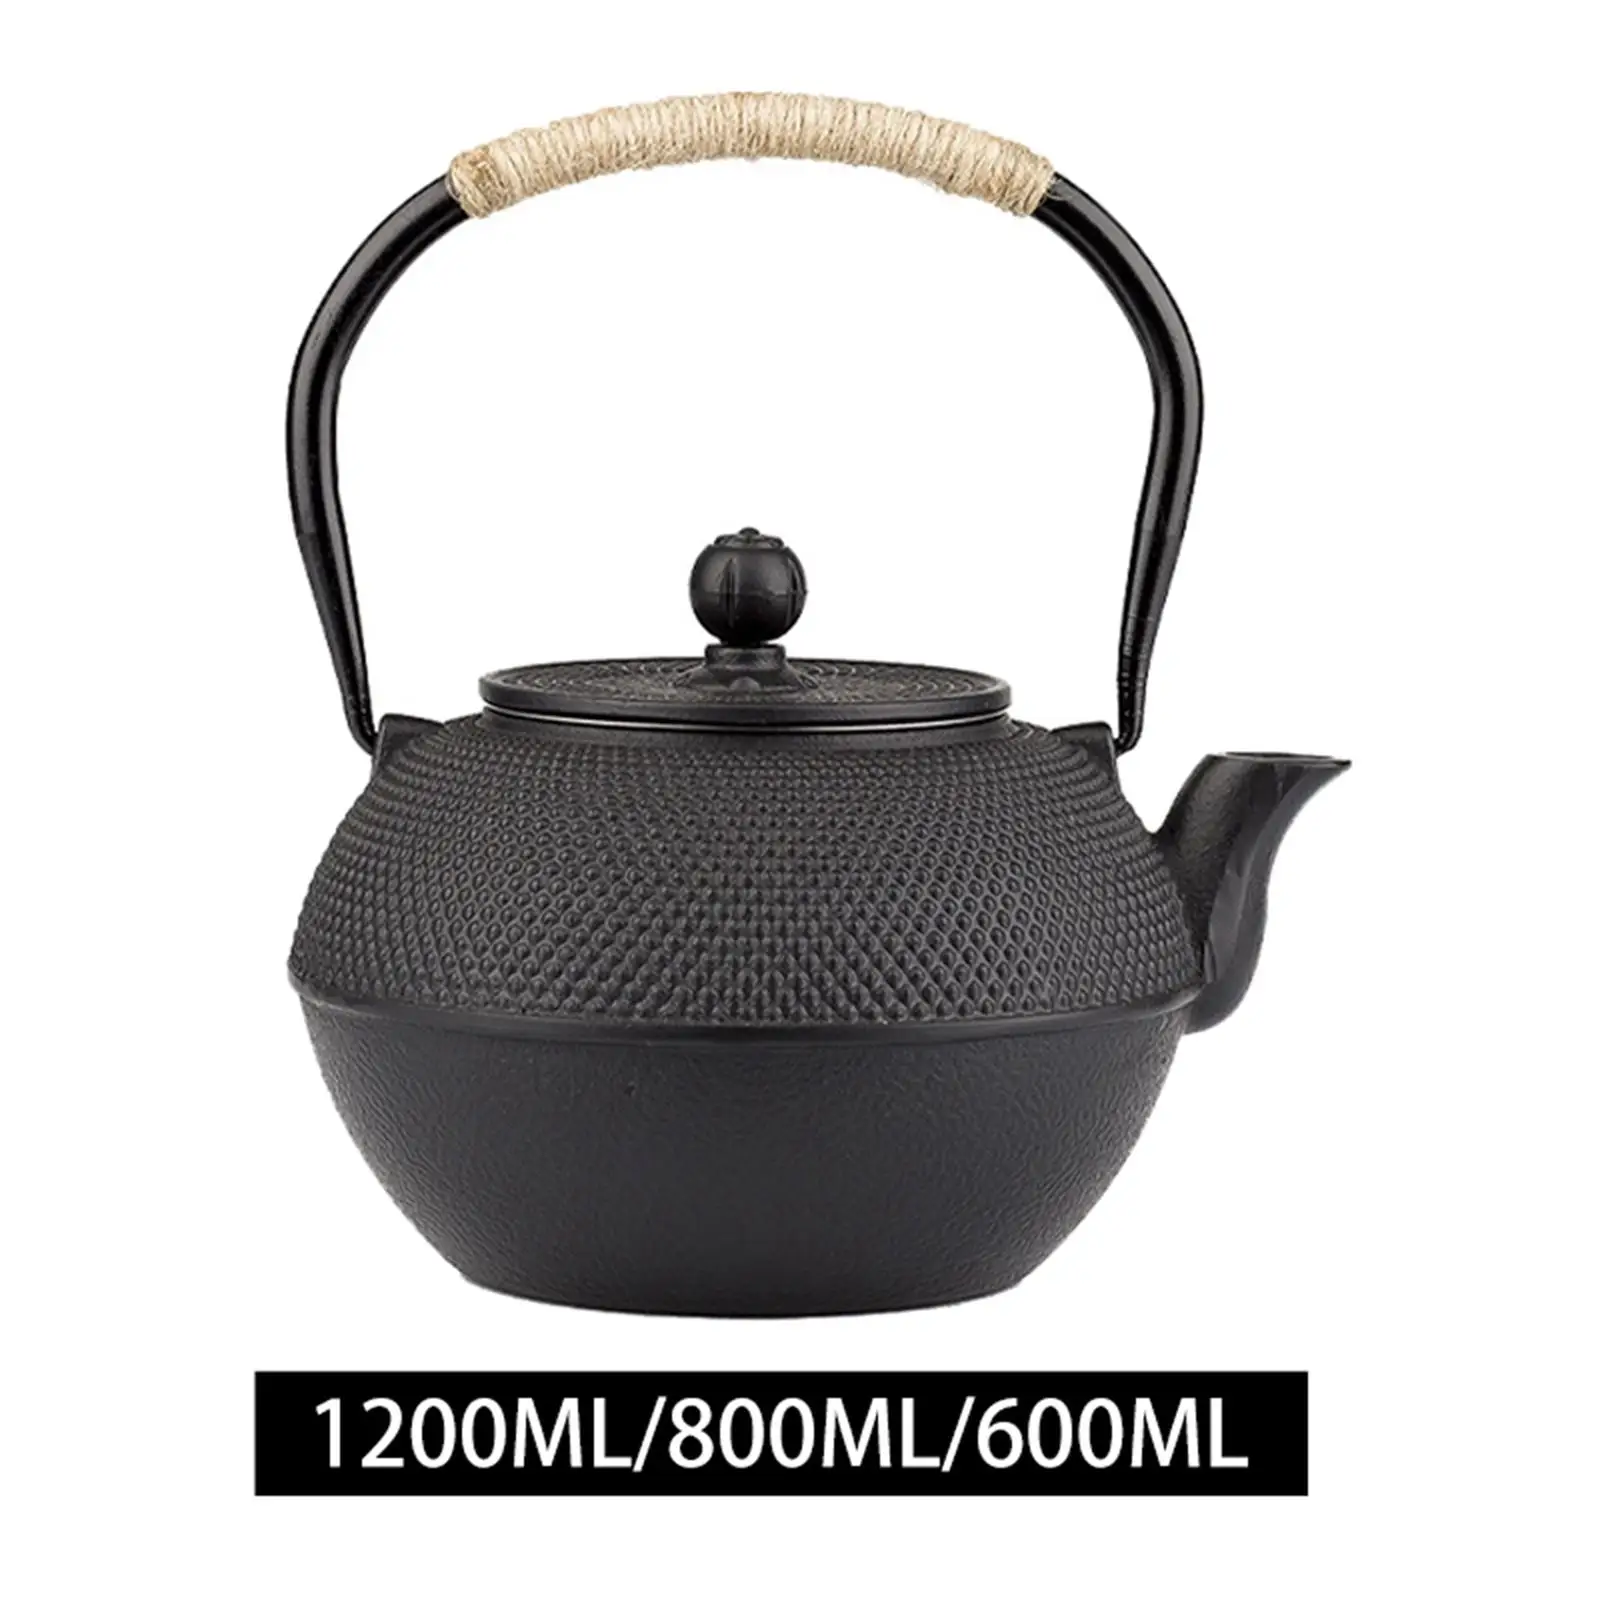 Cast Iron Teapot Tea Kettle for Parents Wood Stove Use ,Enameled Interior to Prevent Rust Pearl Embossing Pattern